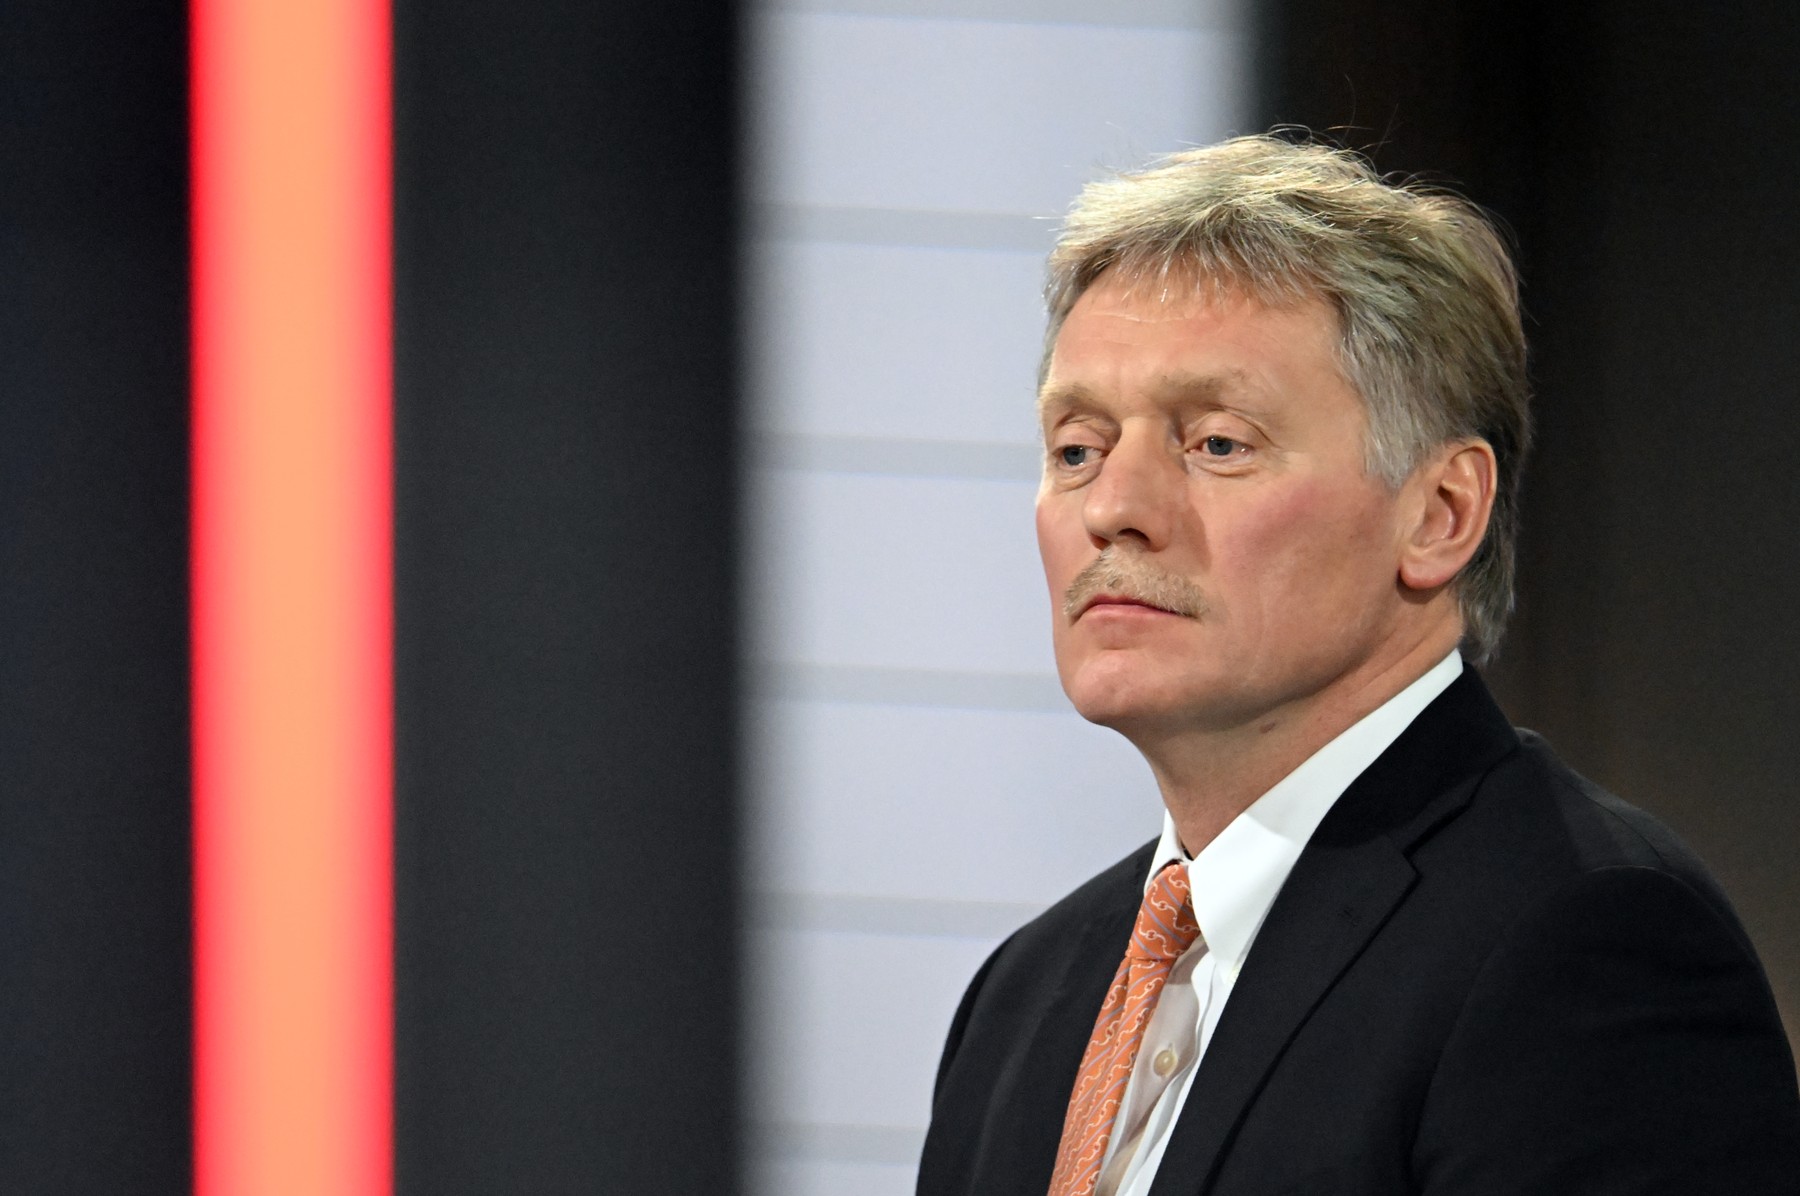 6728240 23.12.2021 Kremlin spokesman Dmitry Peskov attends the annual end-of-year news conference of Russian President Vladimir Putin at the Manezh Central Exhibition Hall, in Moscow, Russia.,Image: 649137950, License: Rights-managed, Restrictions: Editors' note: THIS IMAGE IS PROVIDED BY RUSSIAN STATE-OWNED AGENCY SPUTNIK., Model Release: no, Credit line: Sergey Guneev / Sputnik / Profimedia